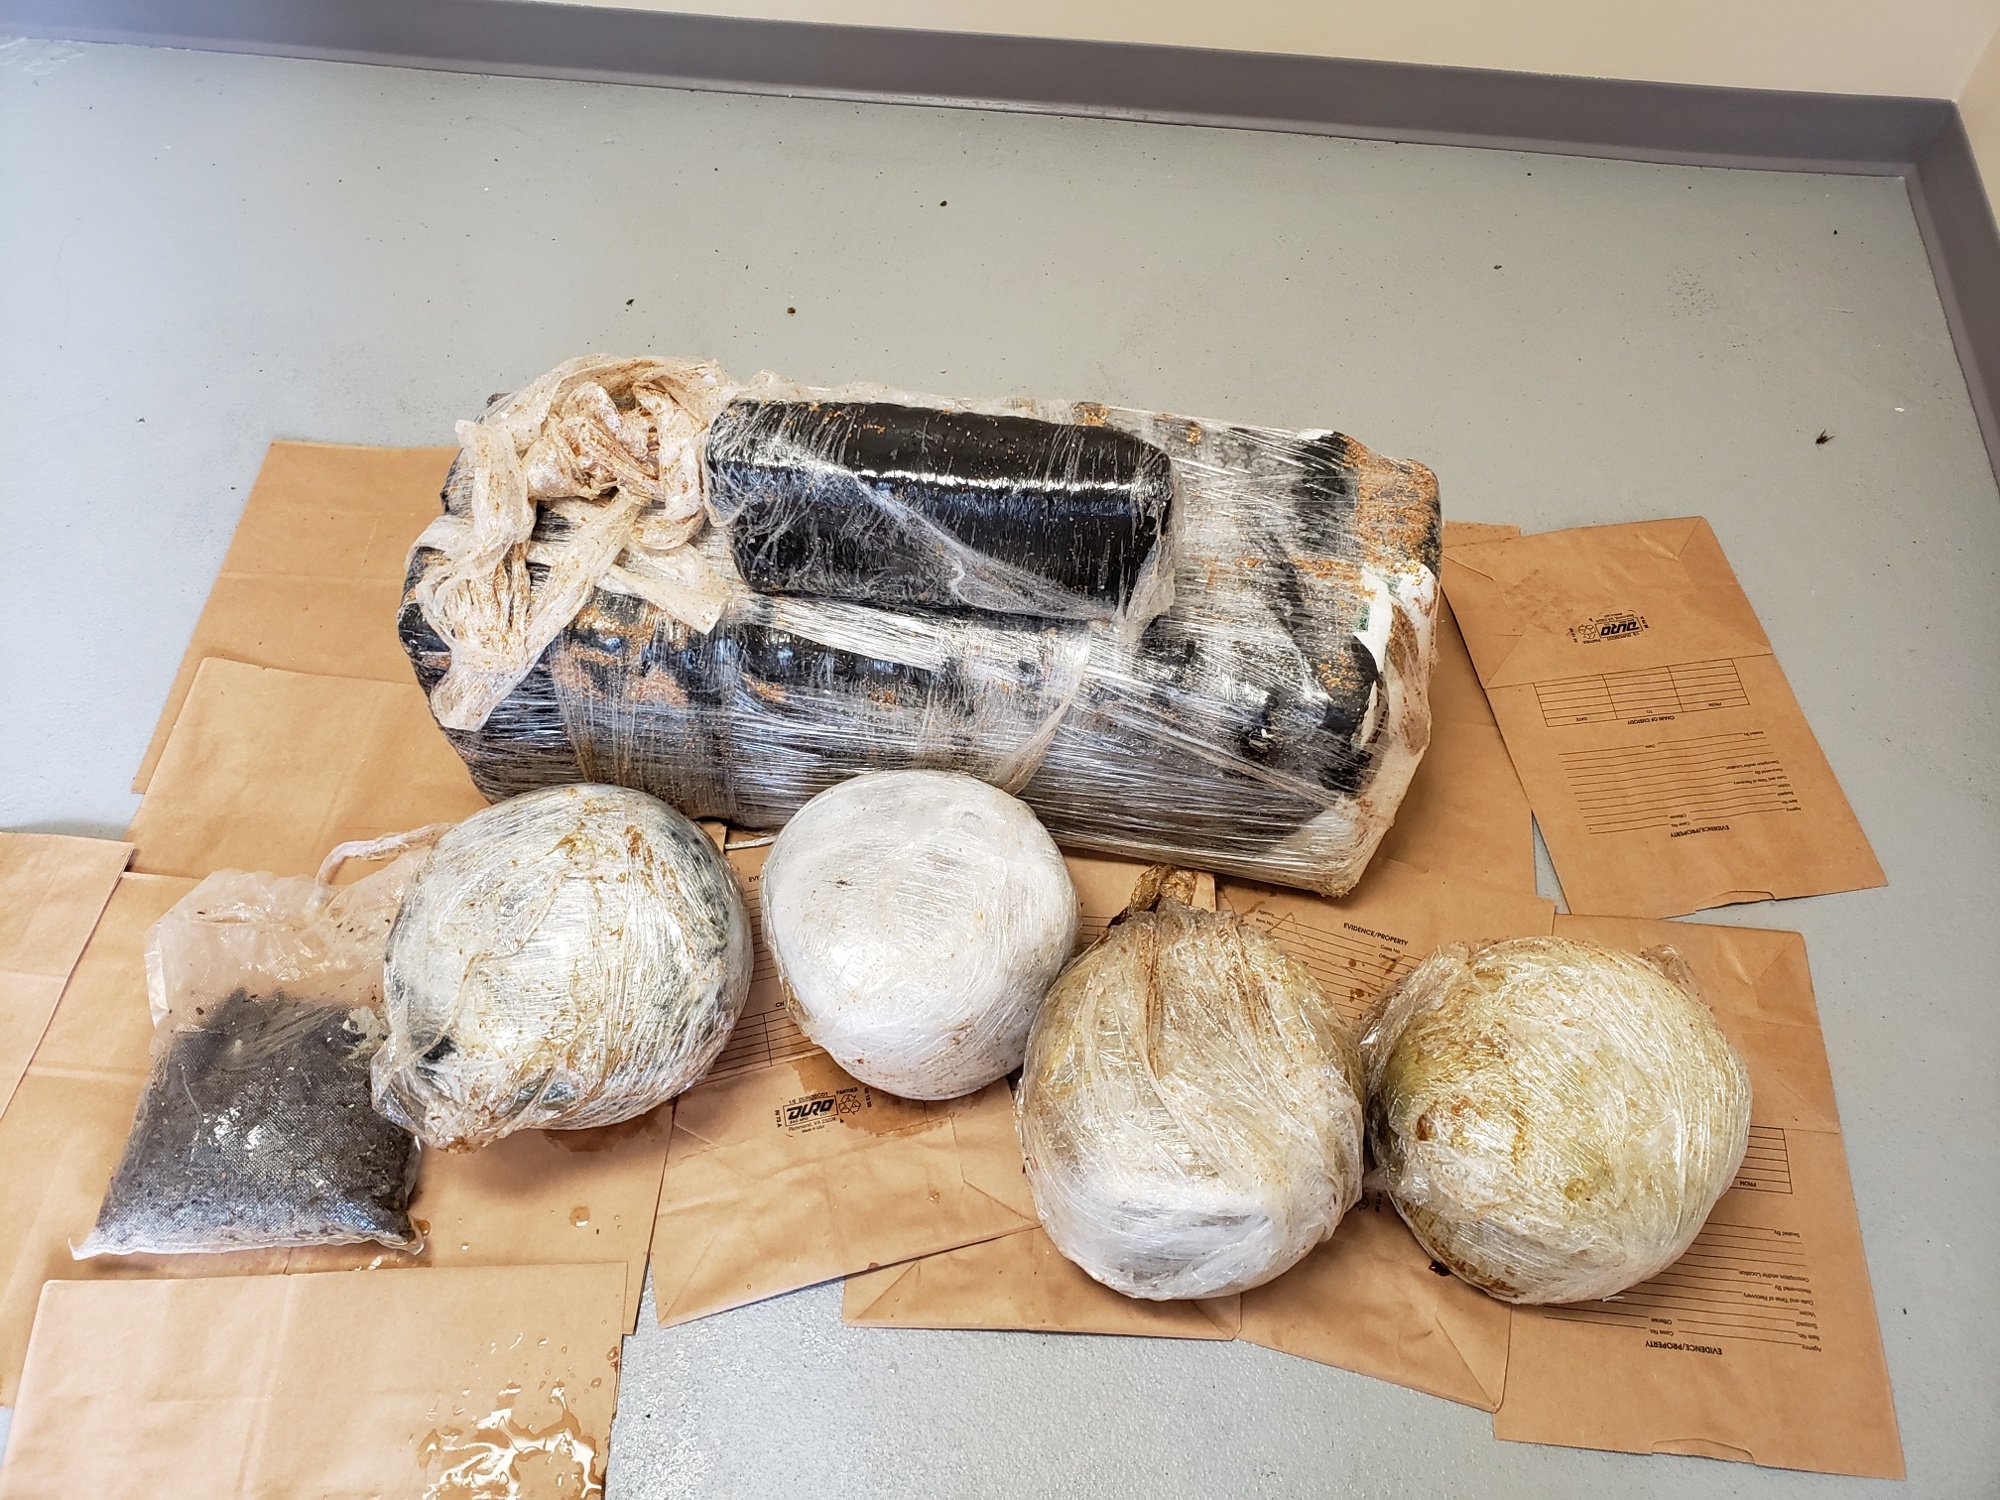 Drugs found on the beach and collected by the FCSO. (Photo courtesy of the FCSO)